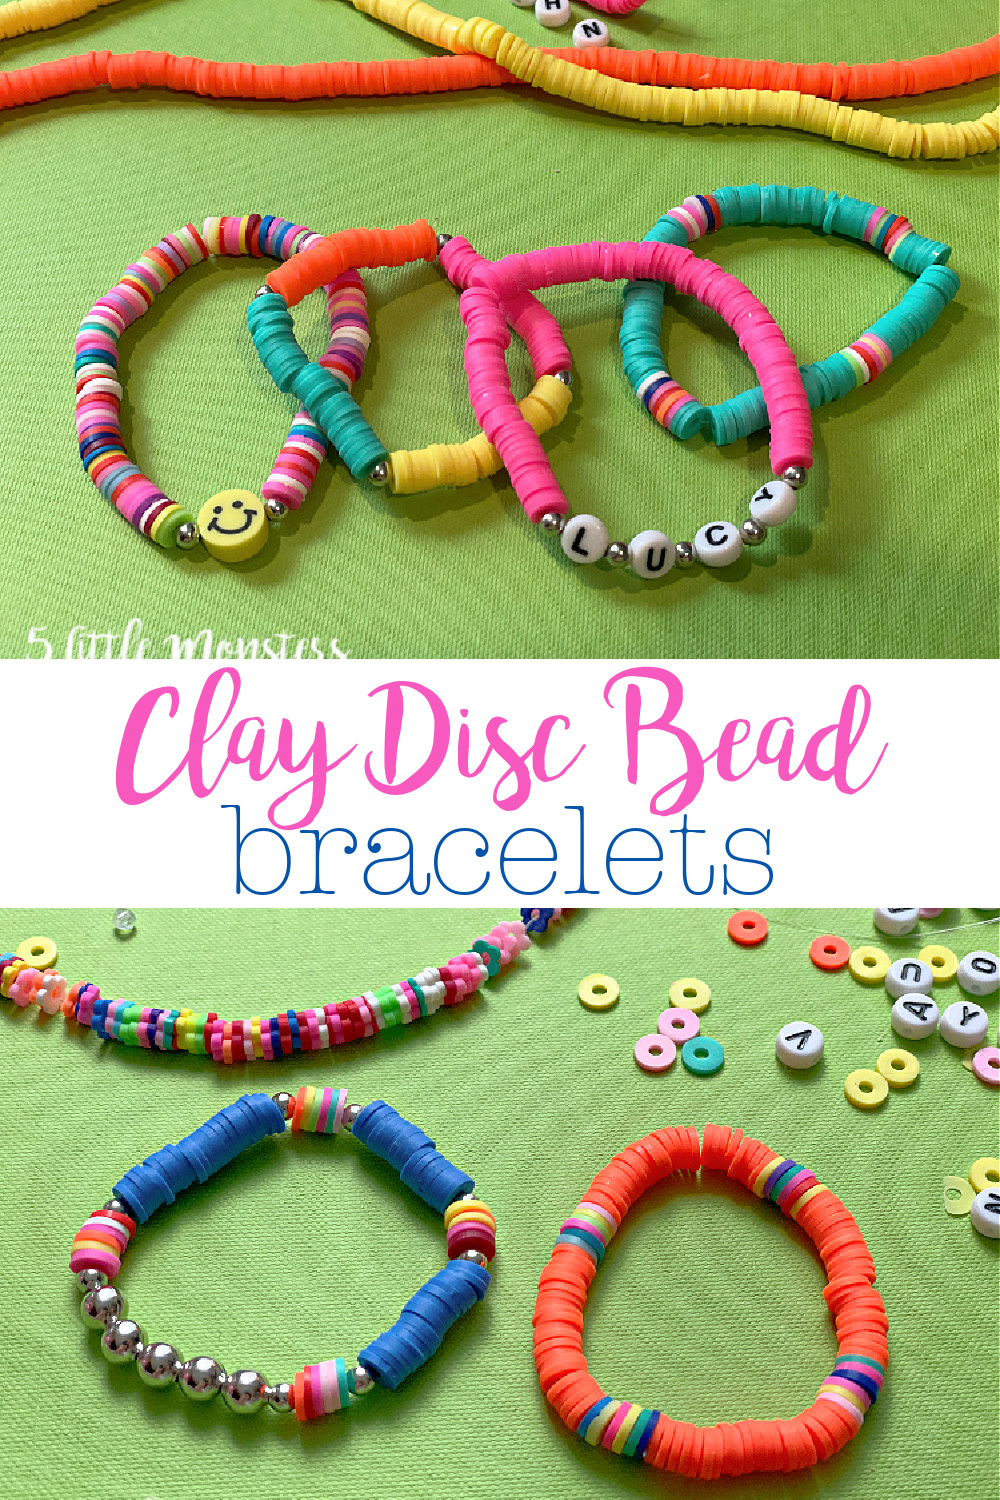 Coloured Smiley Face Bracelets -   Clay bead necklace, Homemade  bracelets, Clay beads